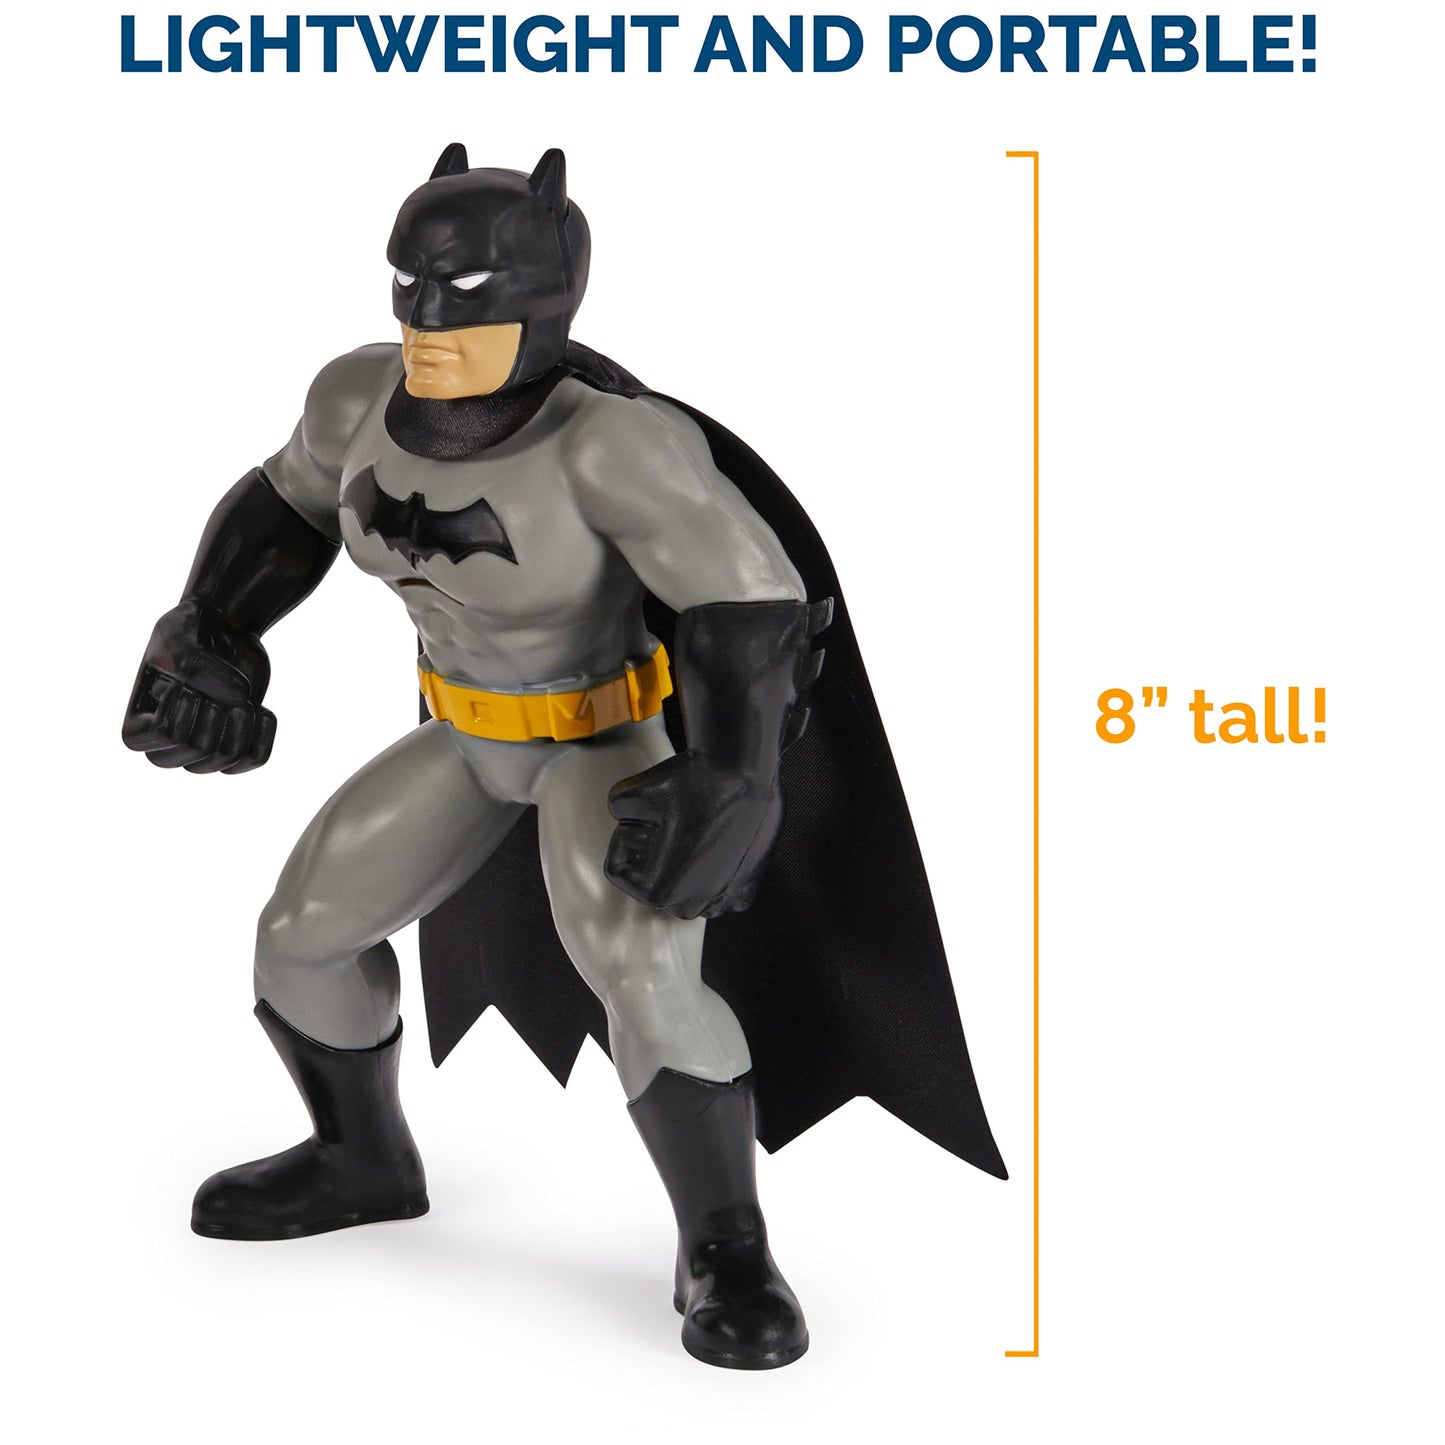 Swimways DC Batman Floatin' Figures, Swimming Pool Accessories & Kids Pool Toys, Batman Party Supplies & Water Toys for Kids Aged 3 & Up